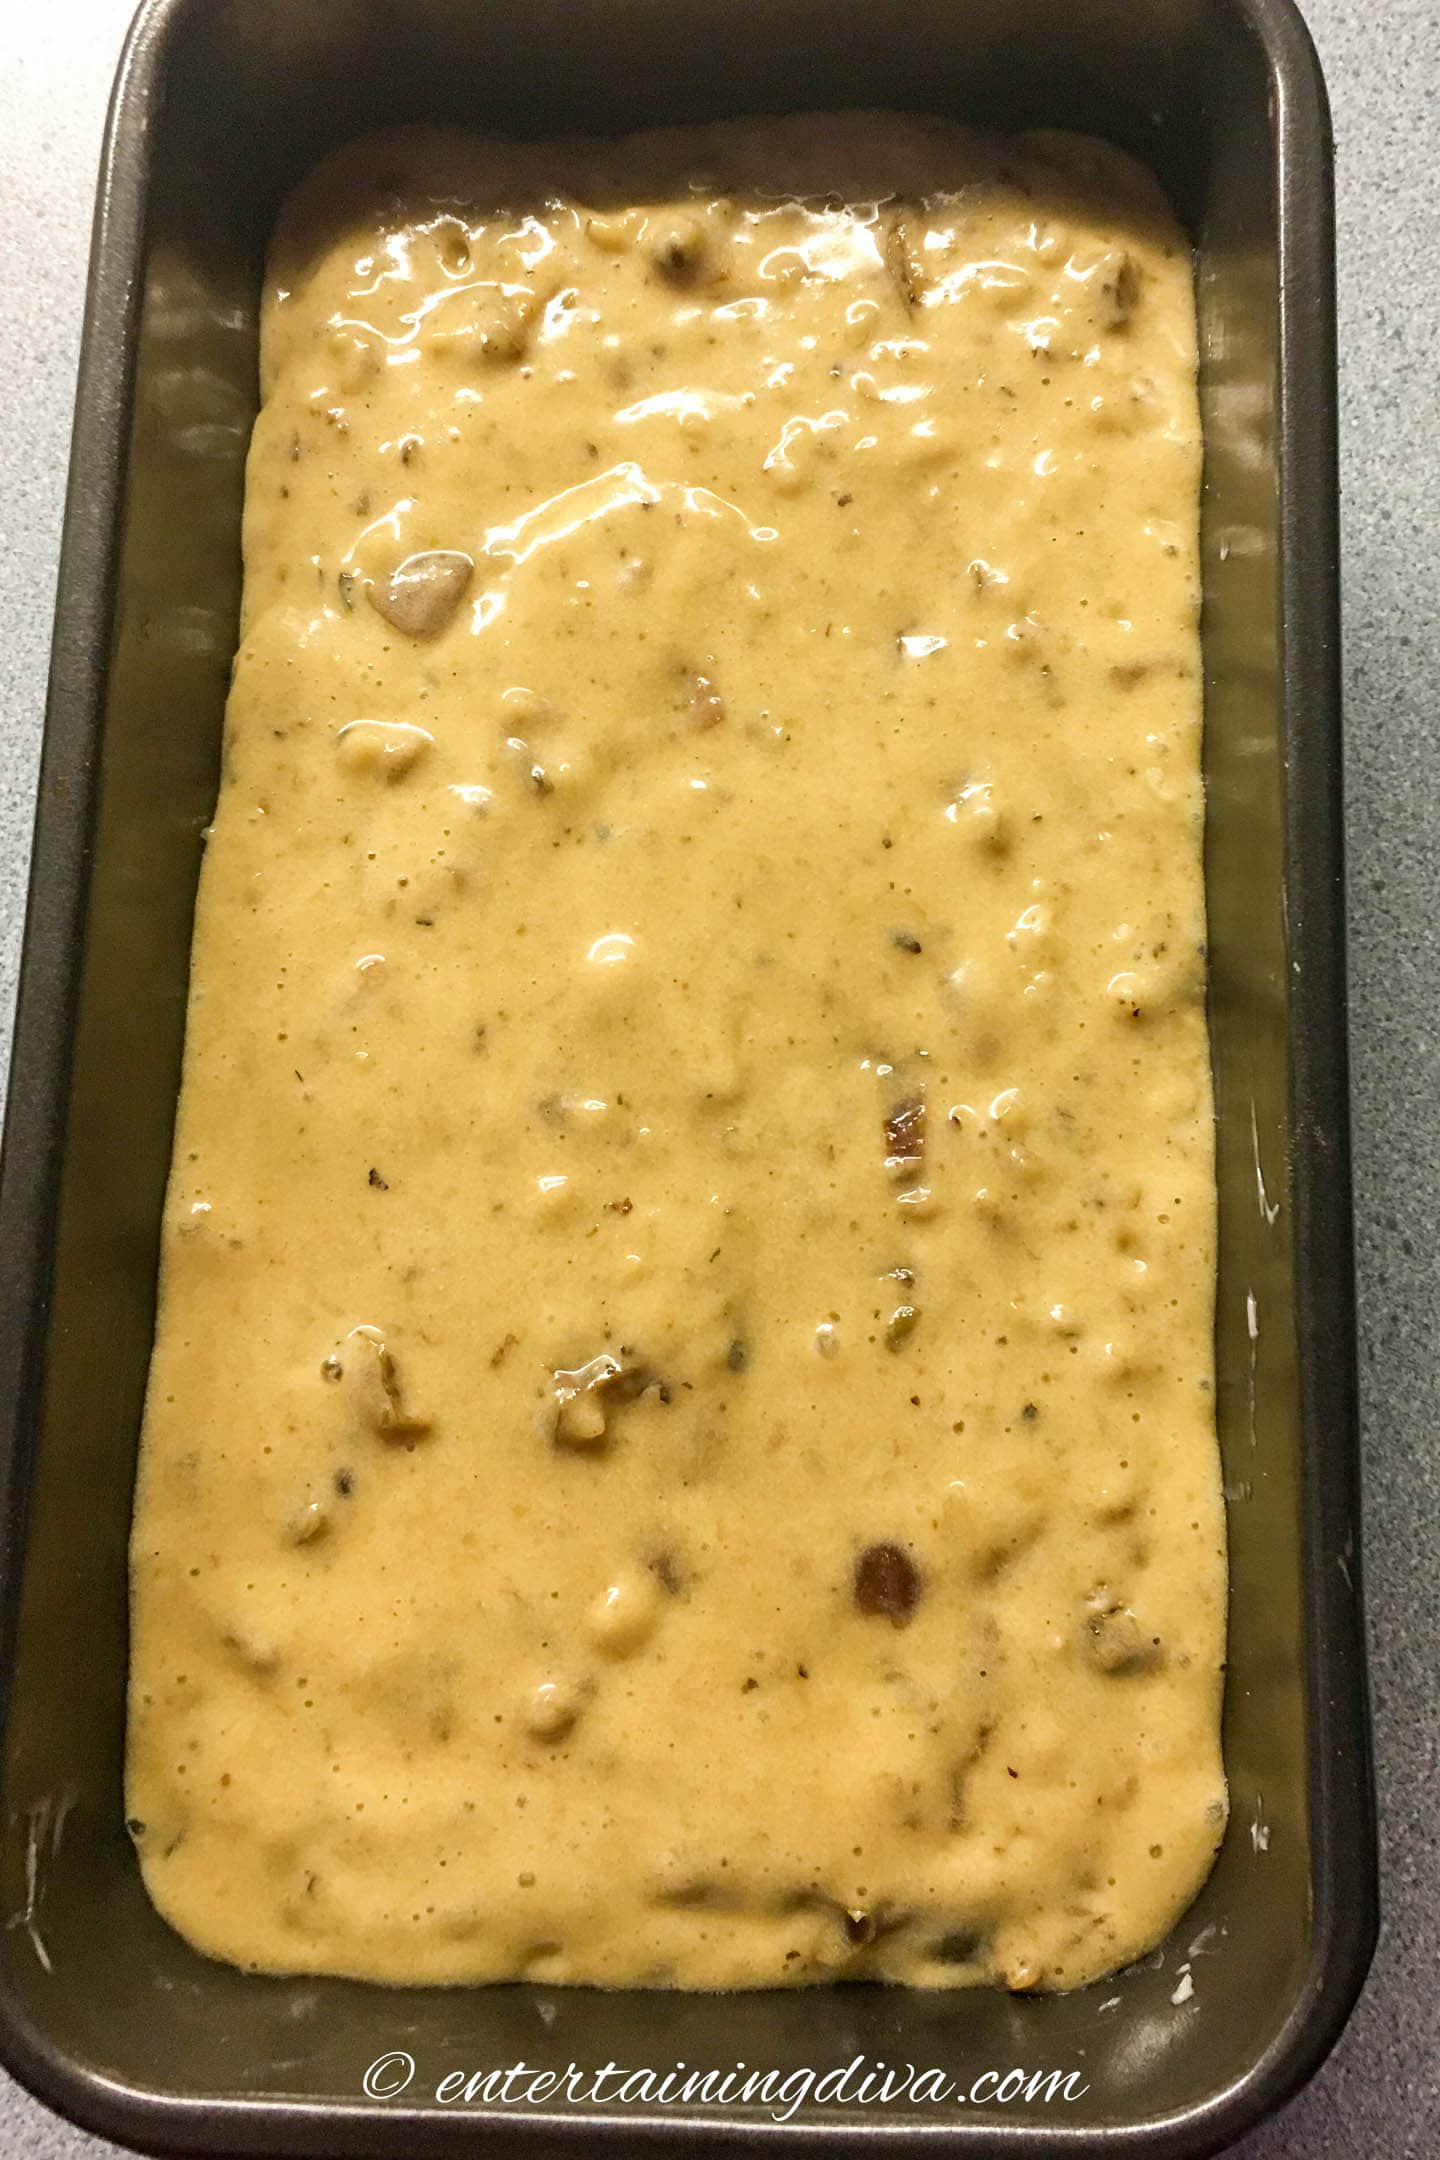 The bread batter in a loaf pan